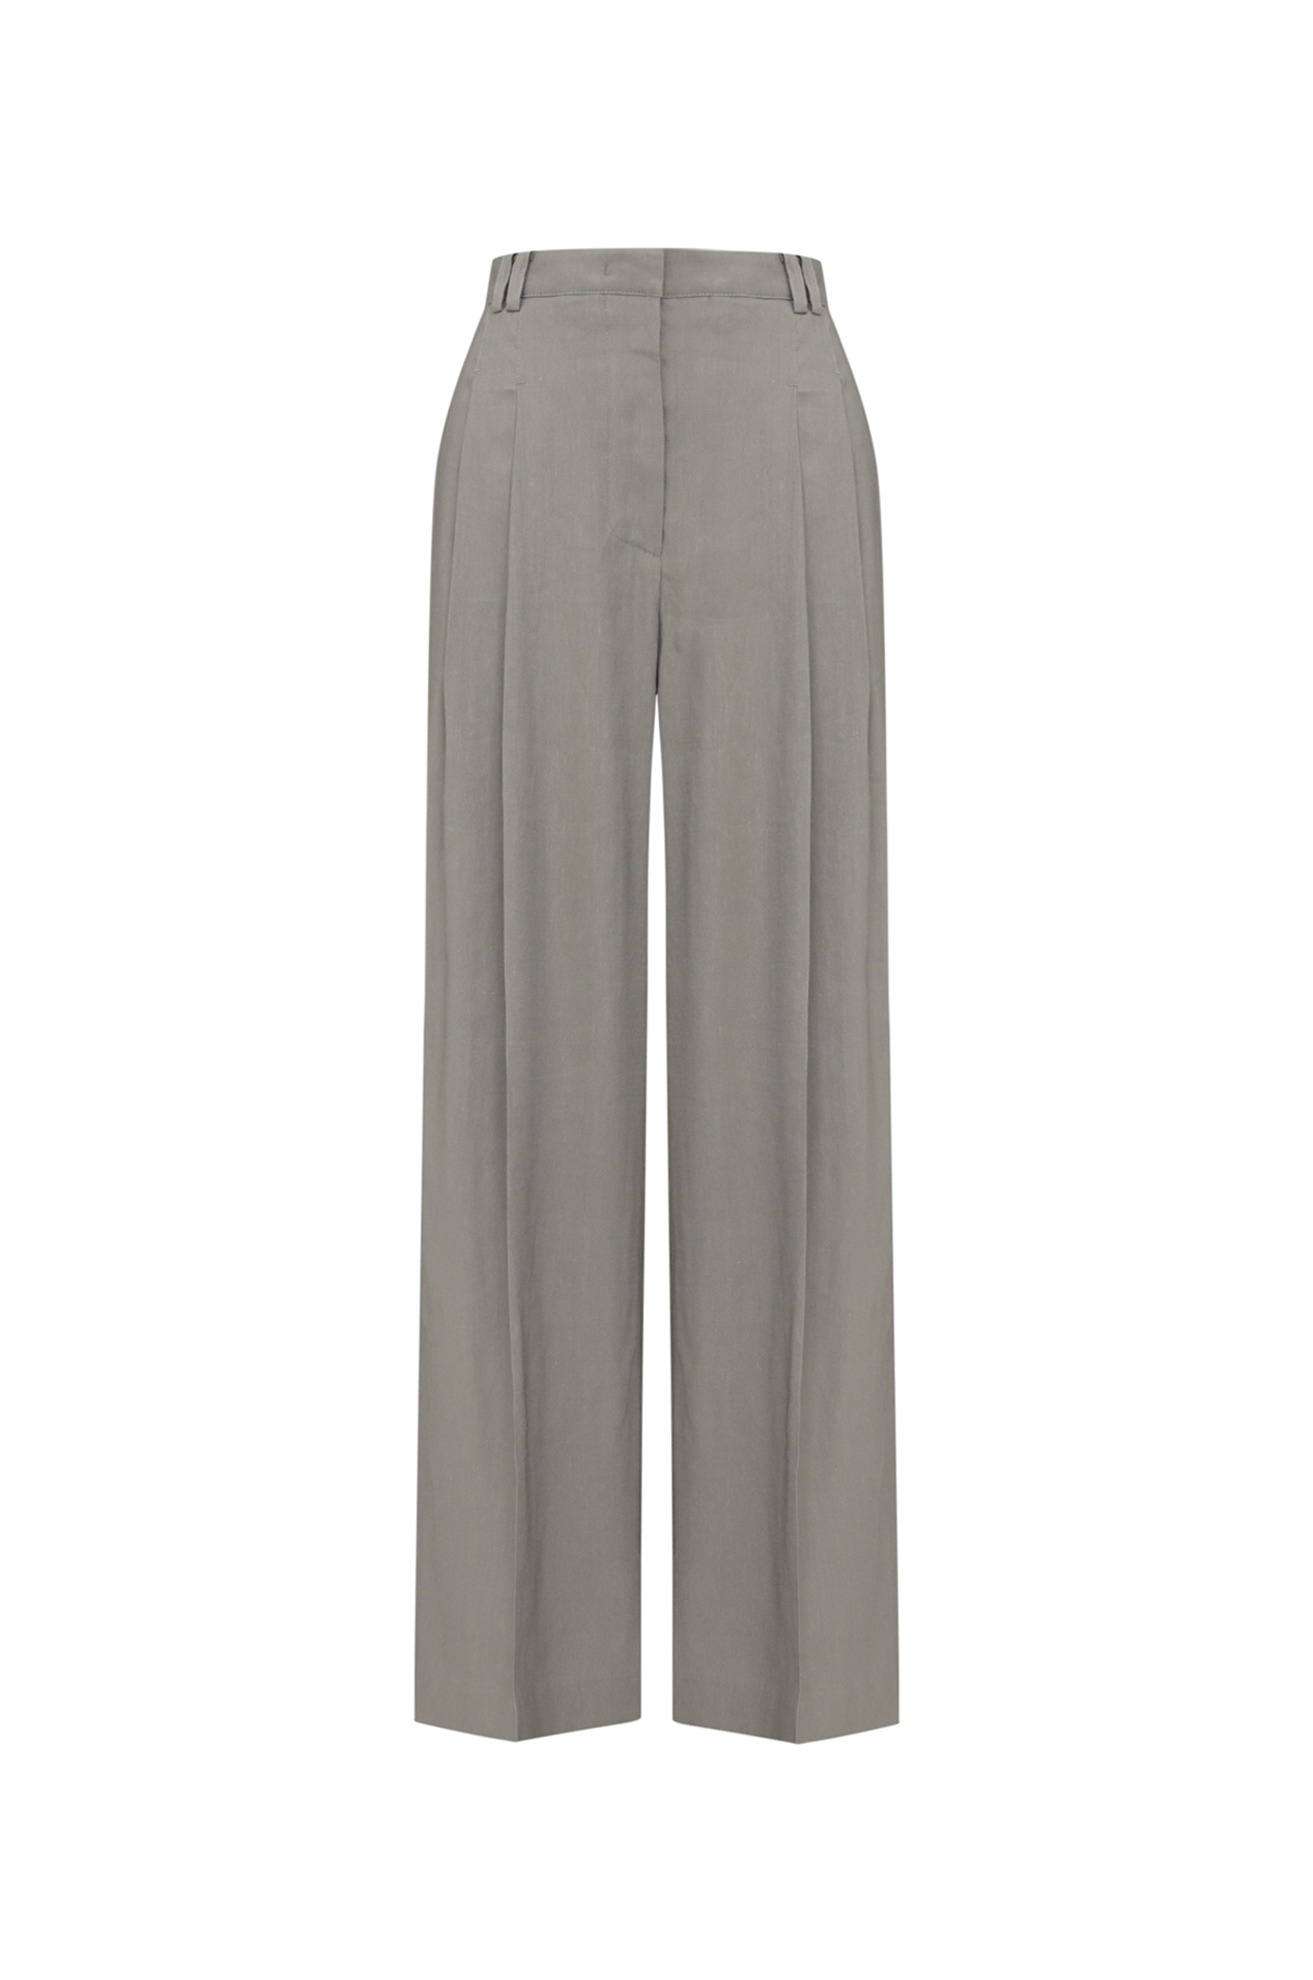 Double Pleated Summer Trousers   7/18 순차발송